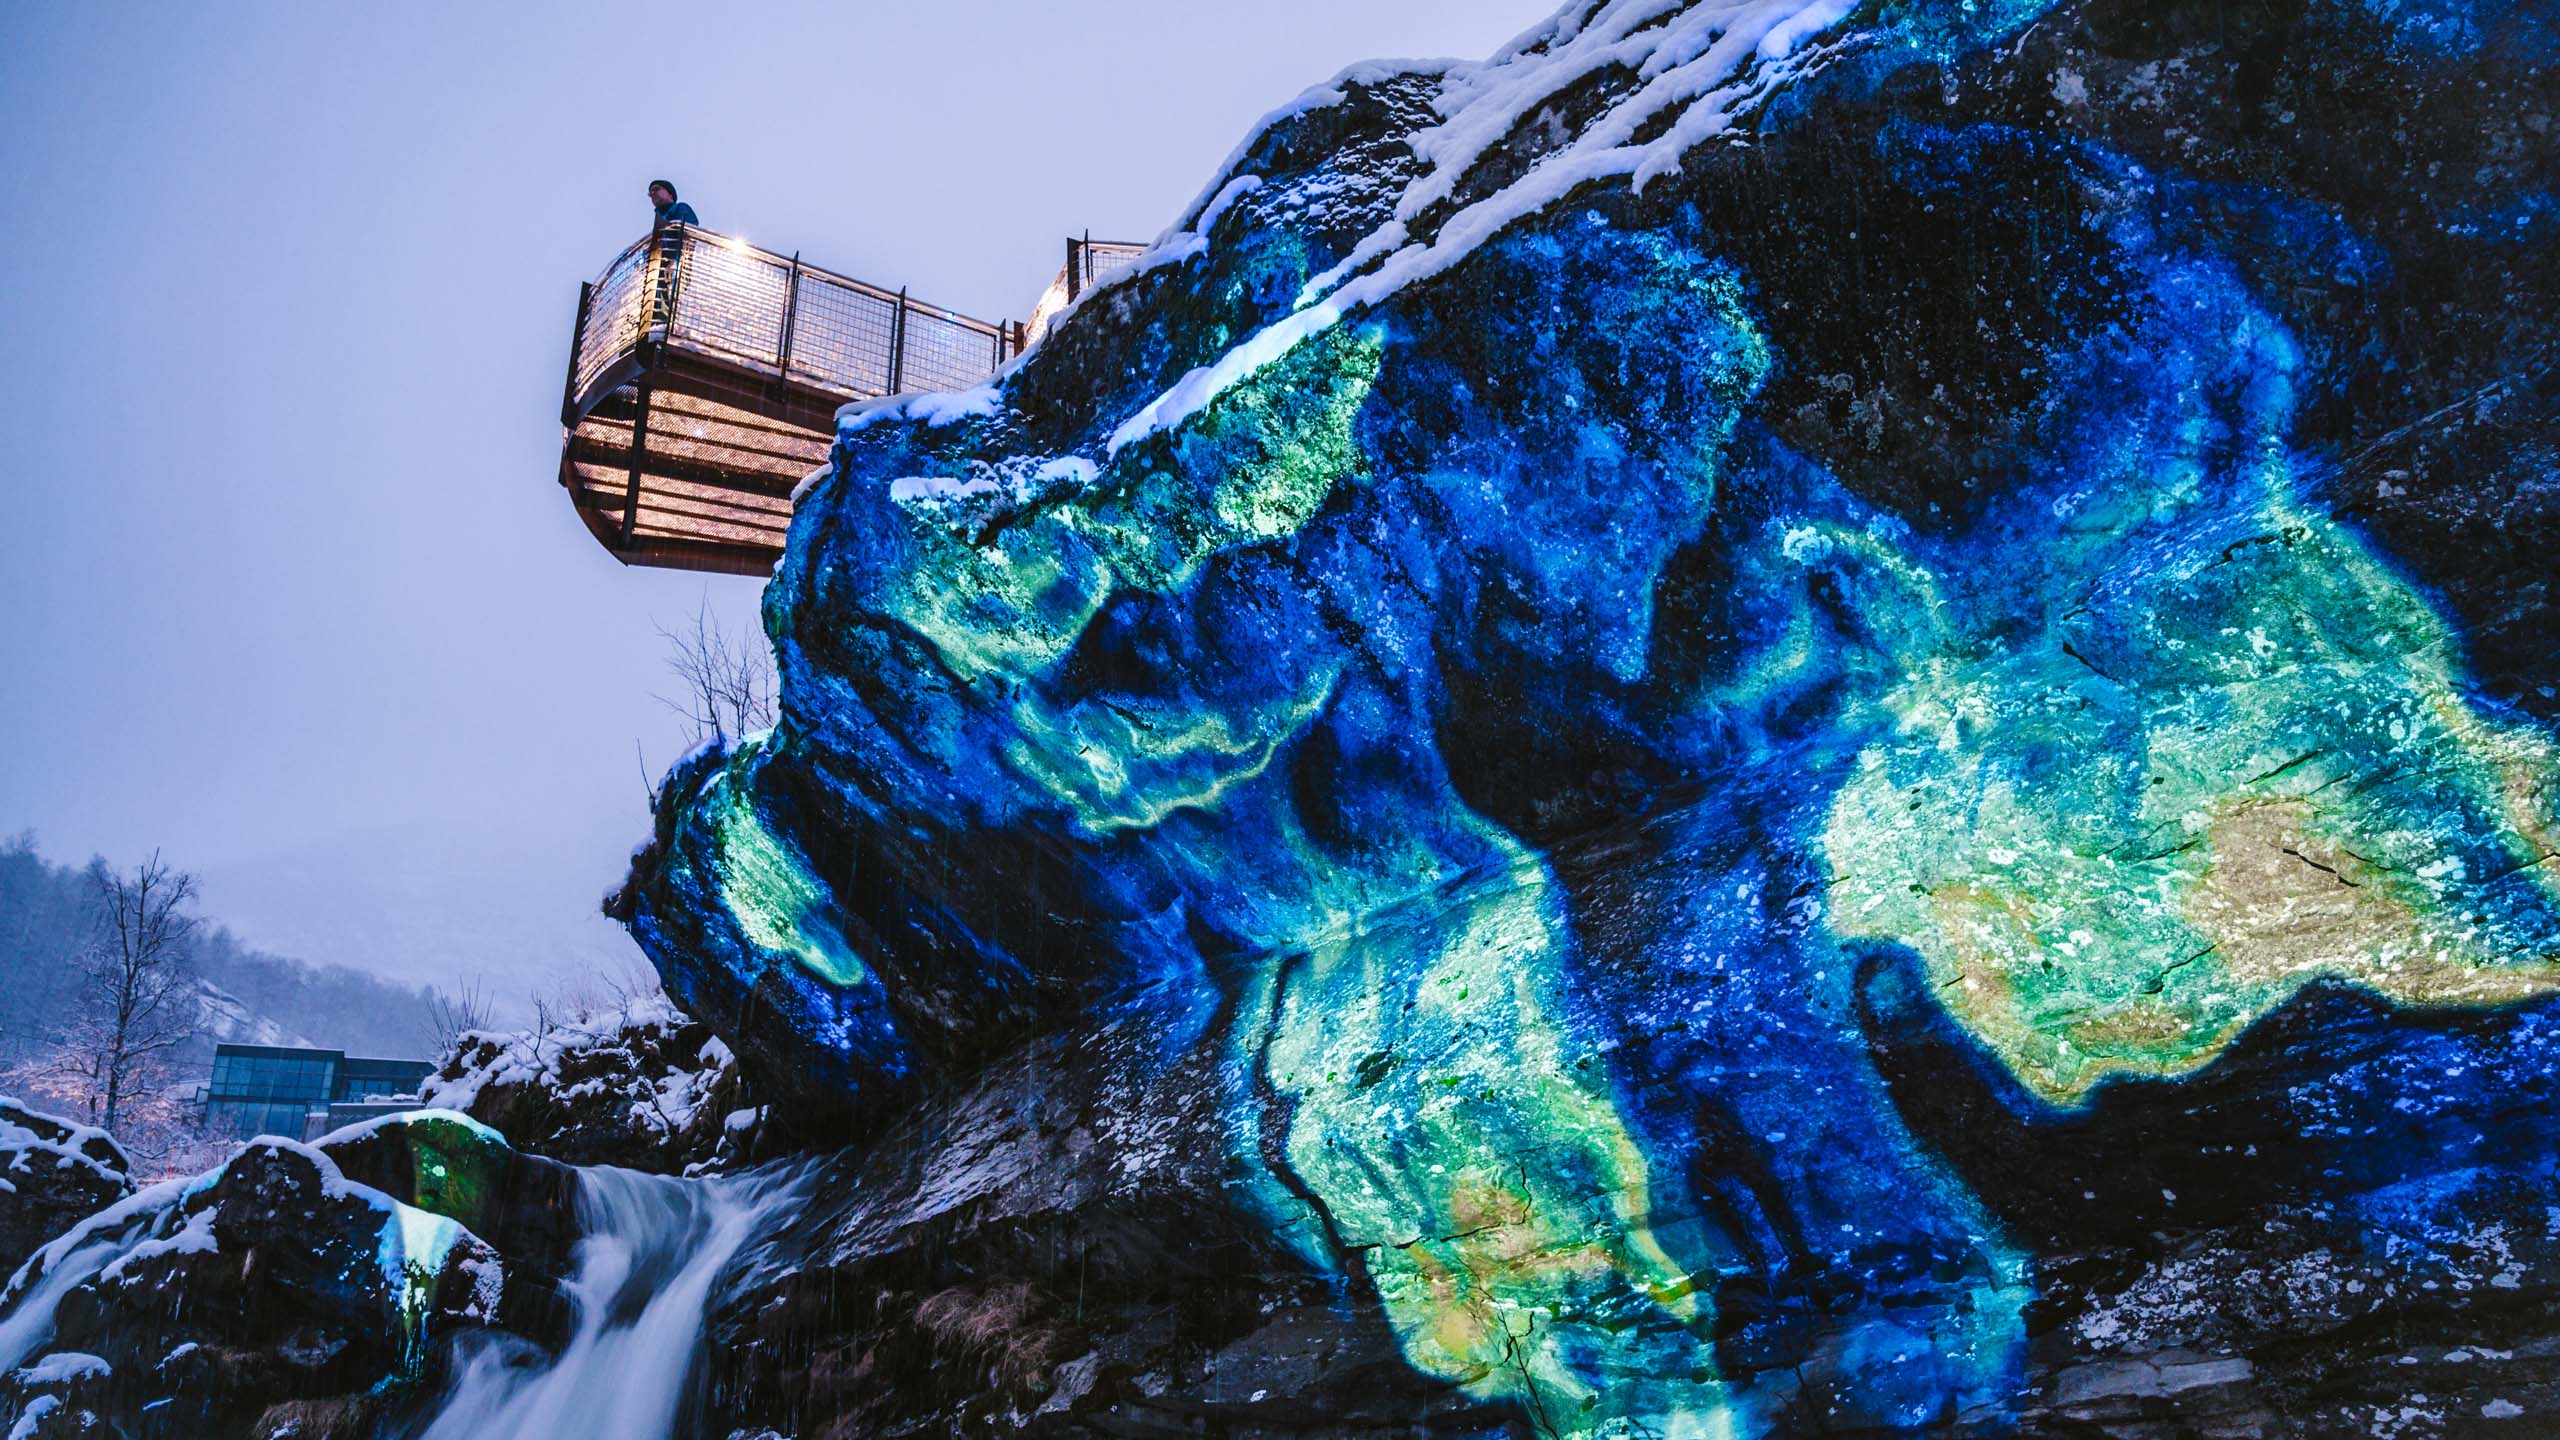 Vide mapping in nature on rocks and waterfall with blue color at geiranger fjord